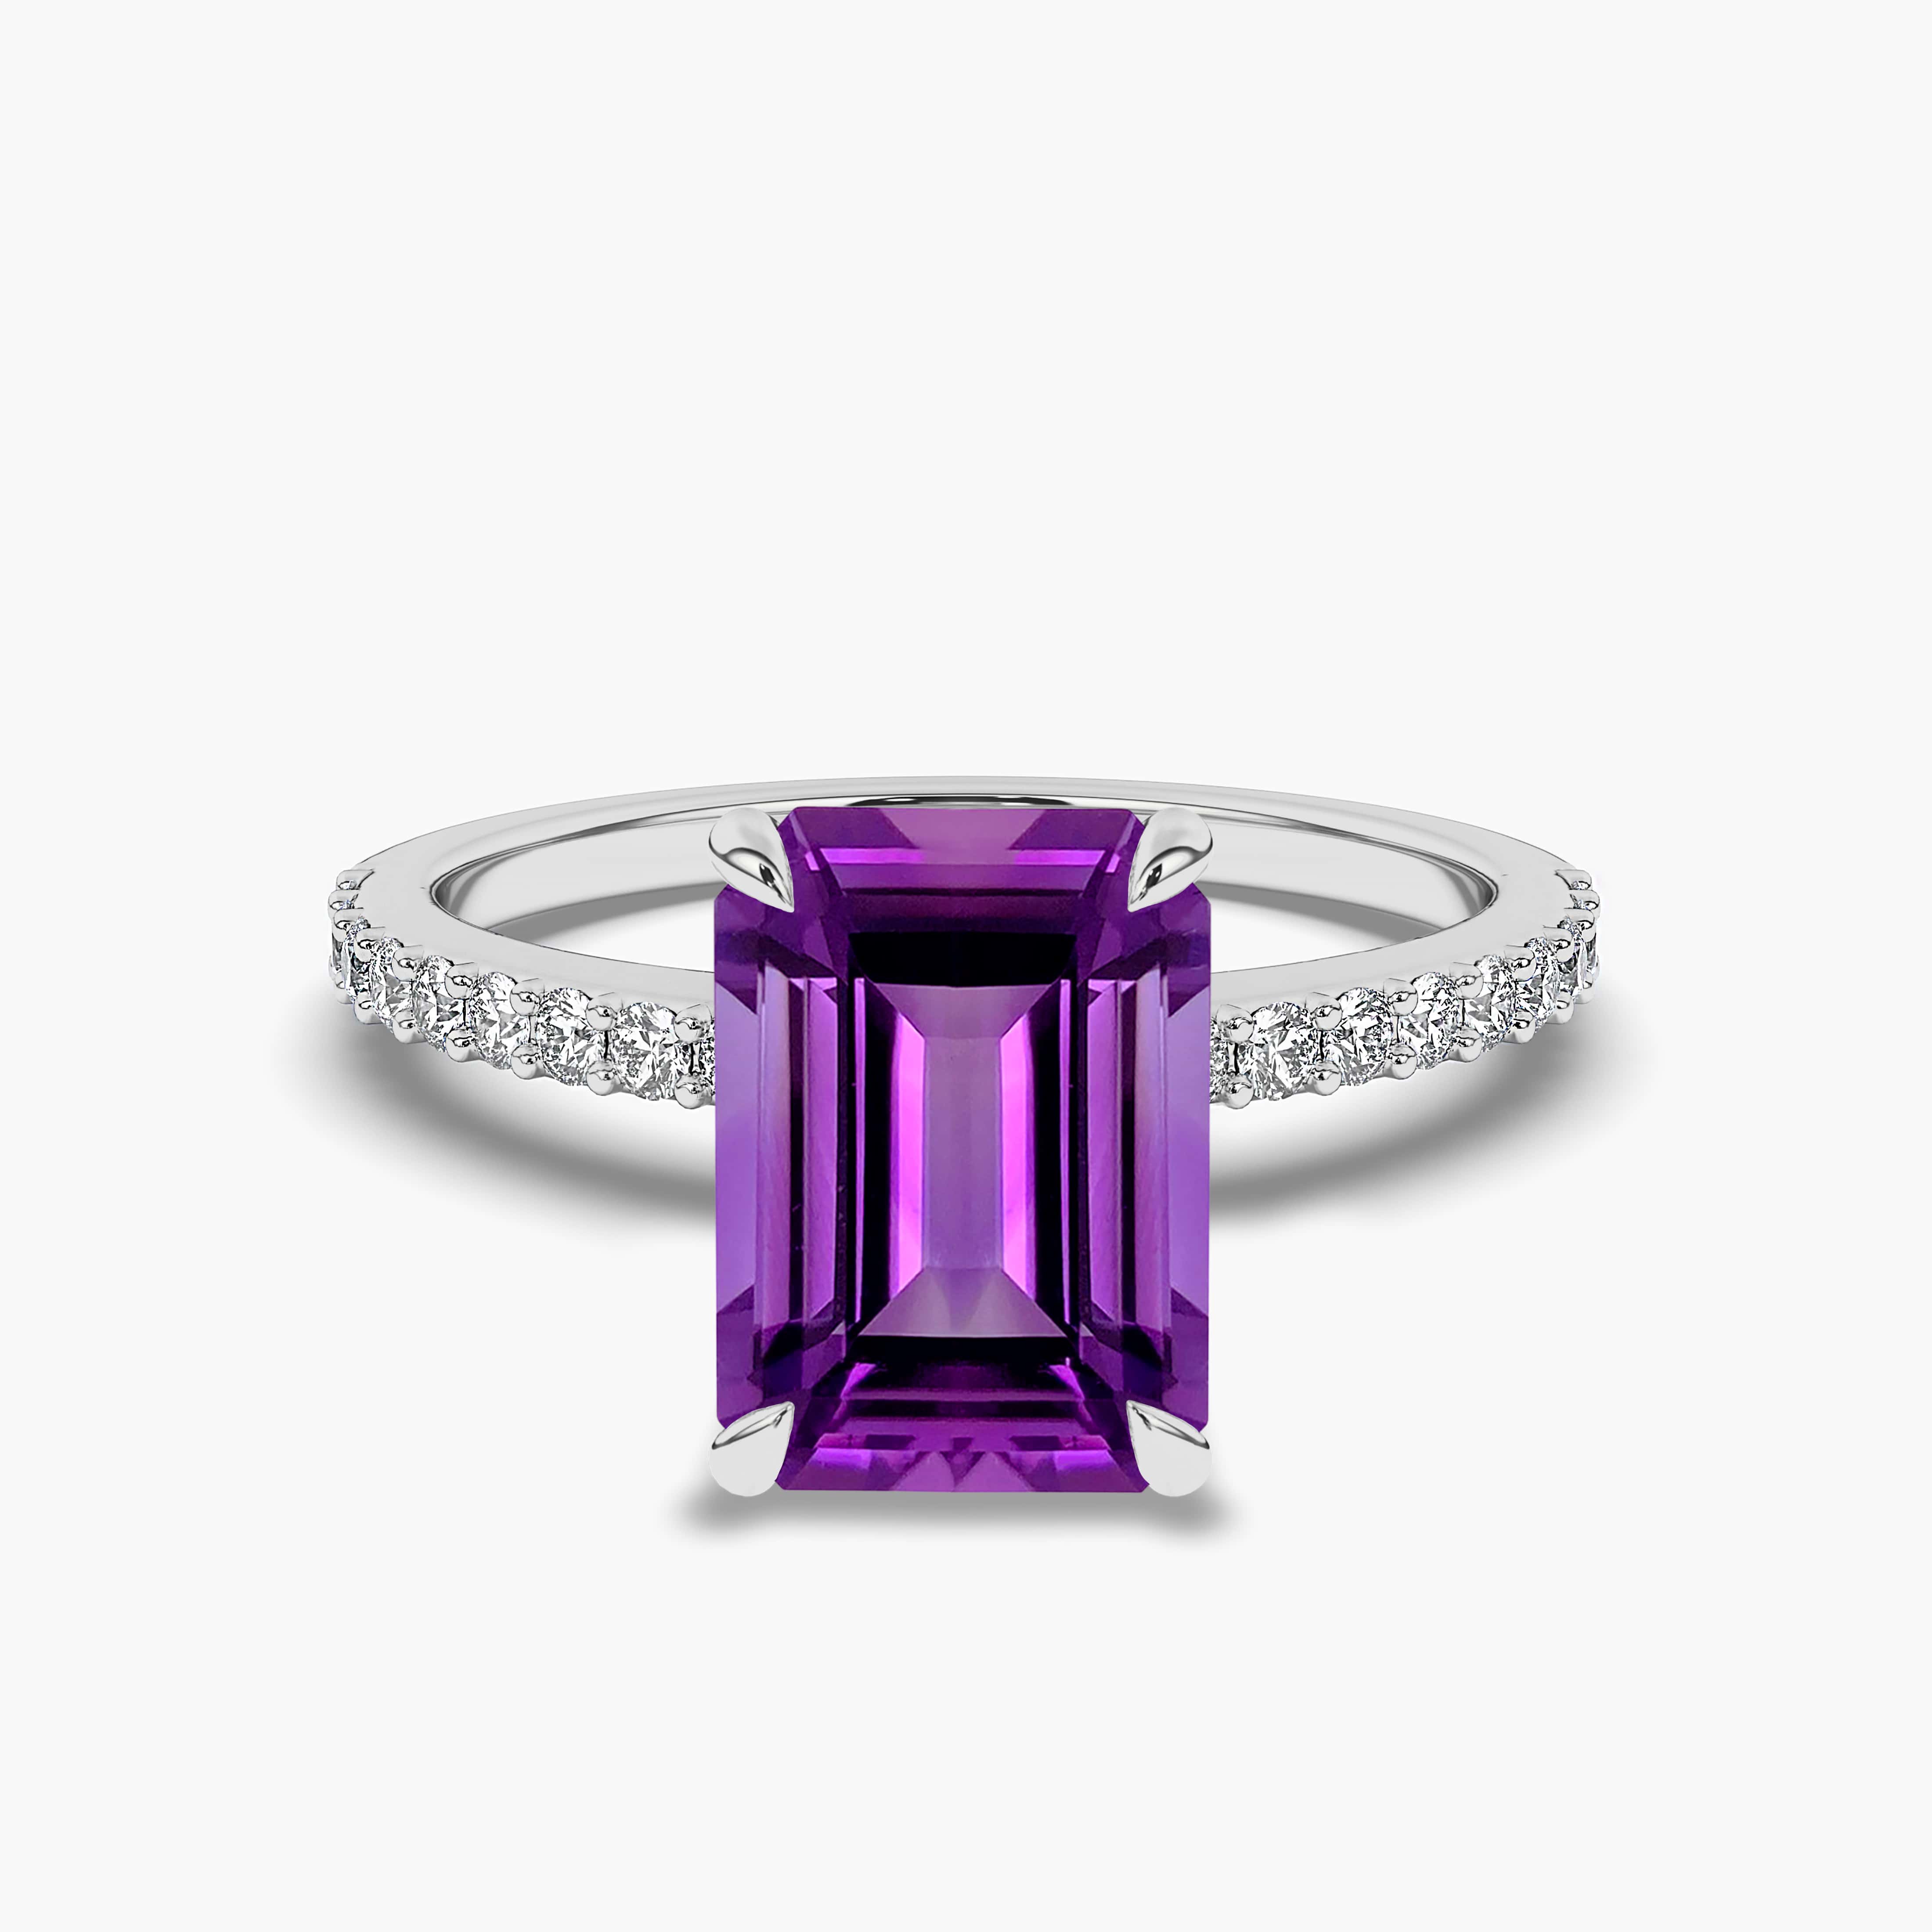 Emerald Cut Amethyst Ring Rose Gold, Amethyst Engagement Ring, February Birthstone In White Gold 